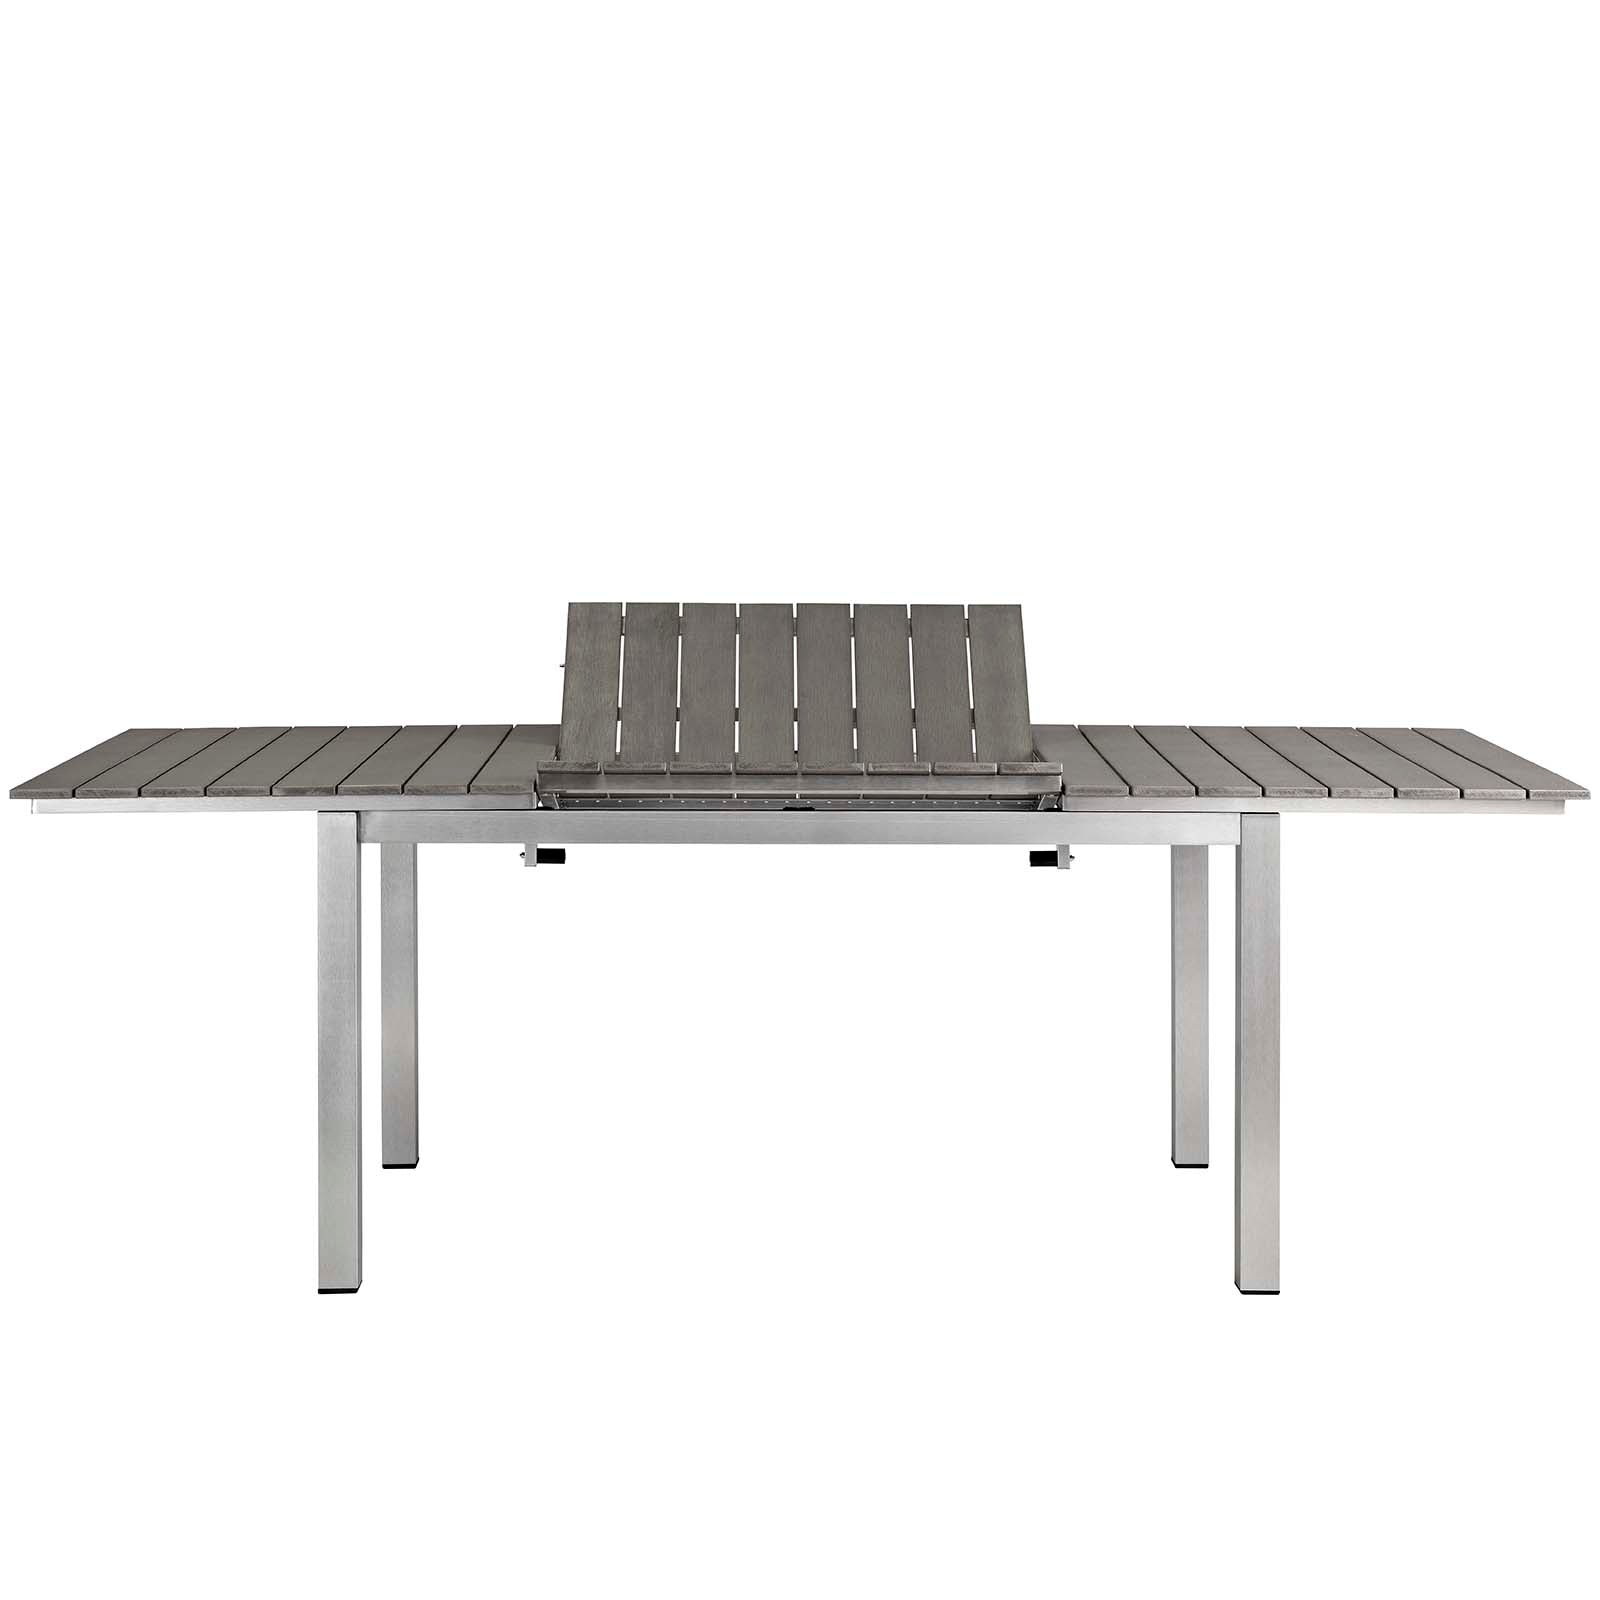 Shore 7 Piece Outdoor Patio Aluminum Outdoor Dining Set - East Shore Modern Home Furnishings